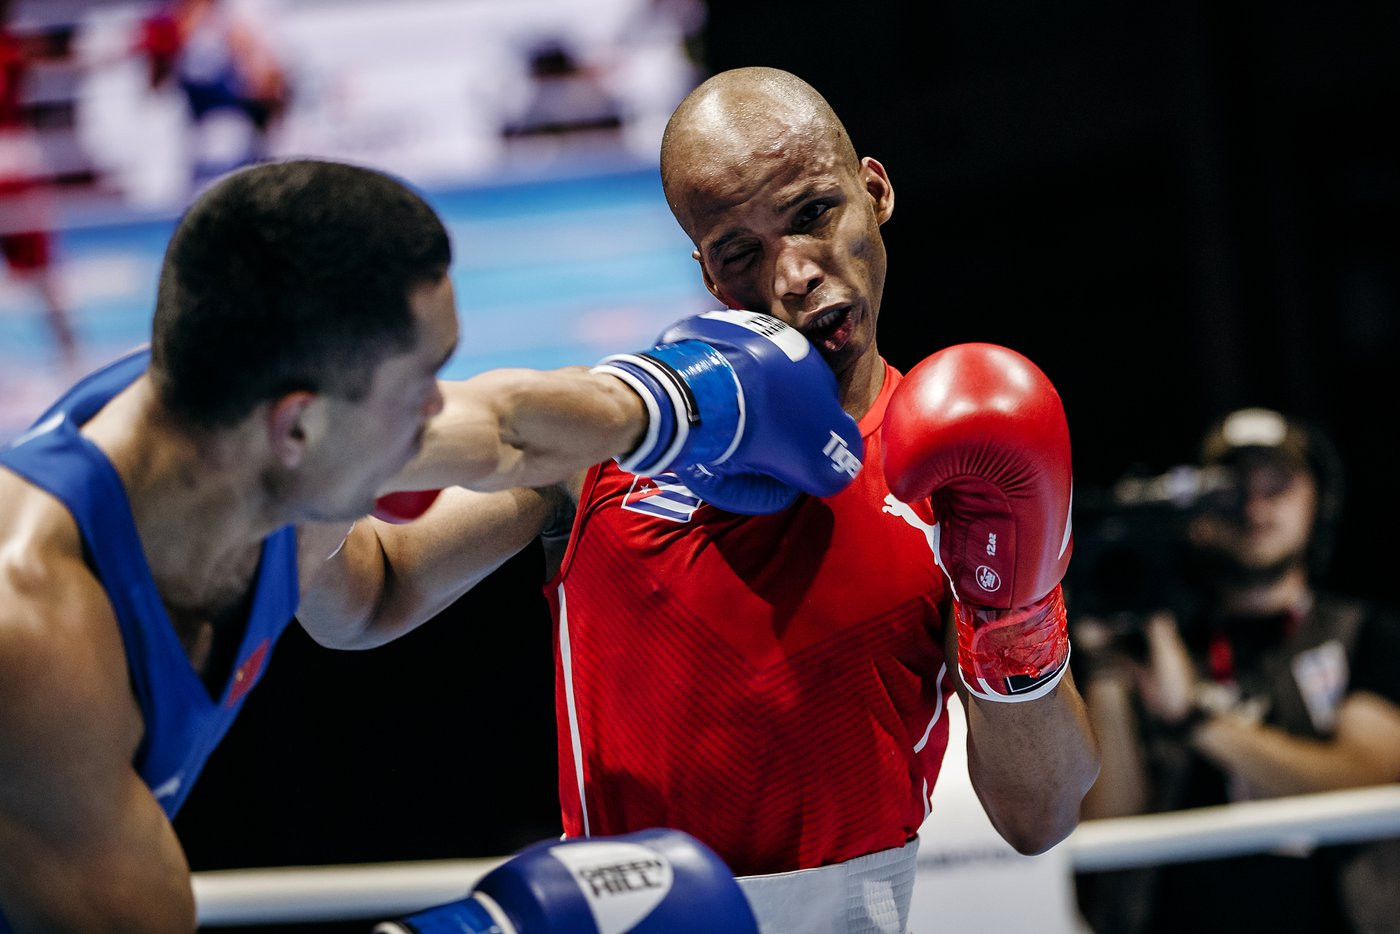 Welterweight top seed Iglesias records unanimous victory at AIBA World Championships